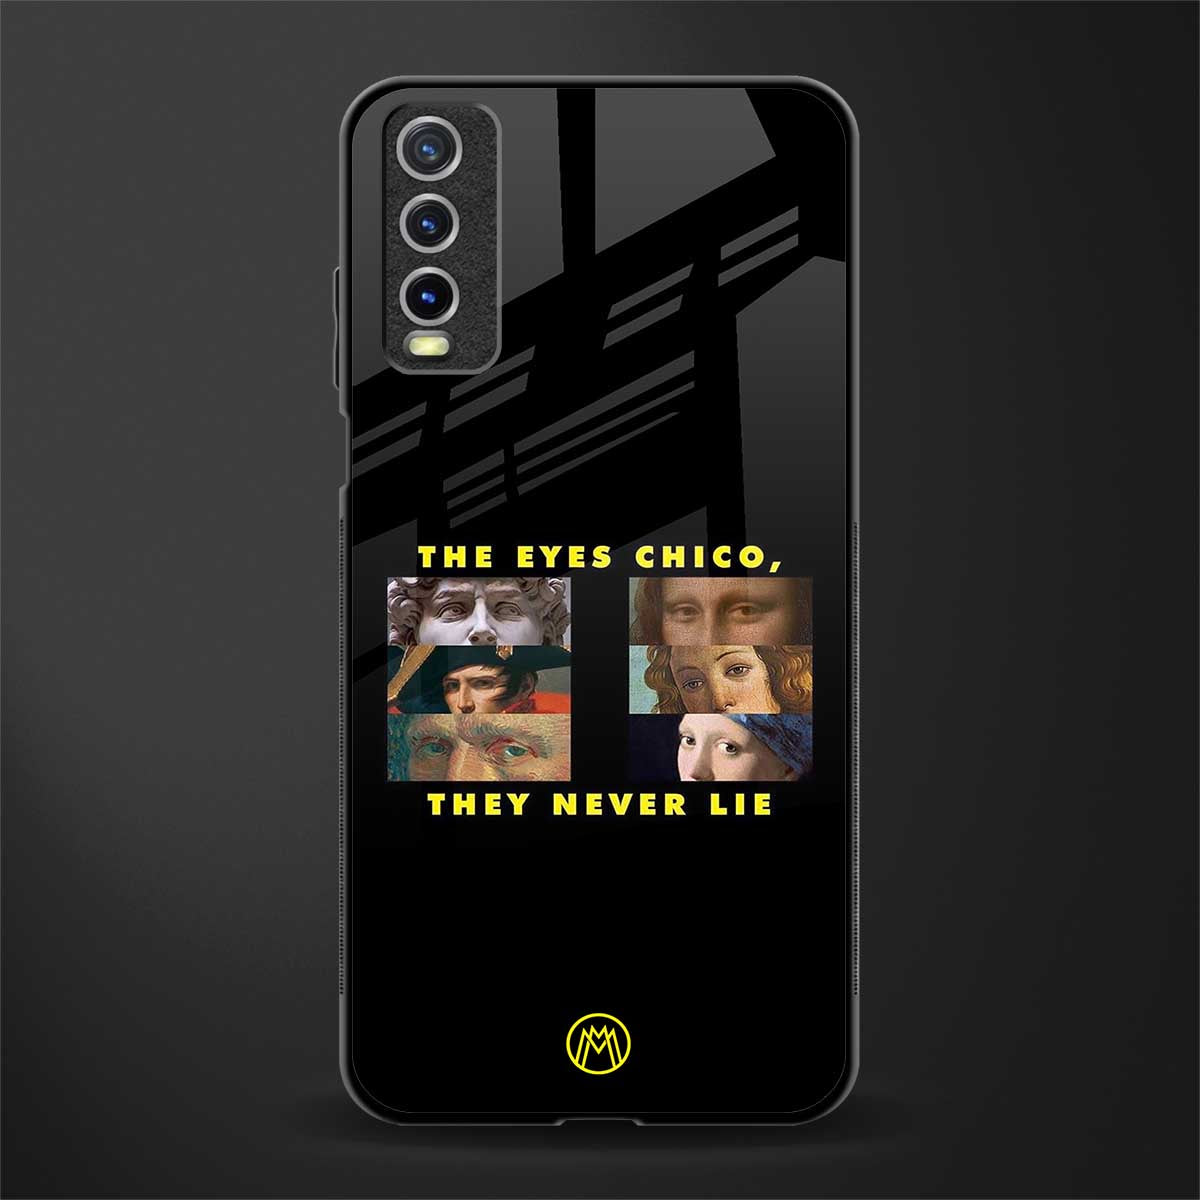 the eyes chico, they never lie movie quote glass case for vivo y20 image